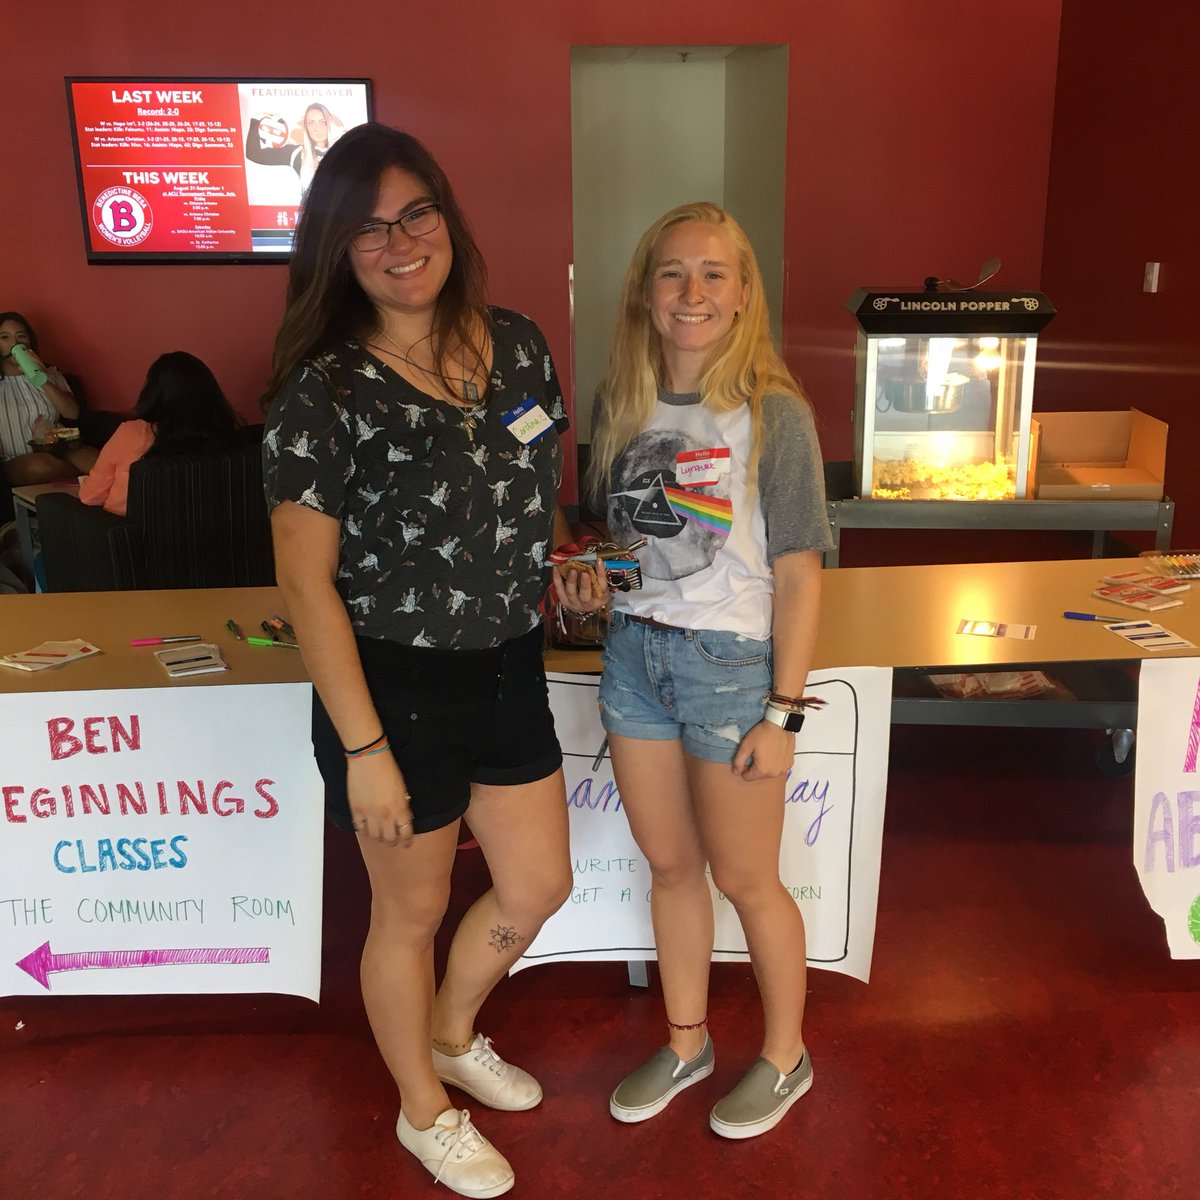 A busy first day on the BenU Mesa campus is almost in the books! Both the SAAC and Student Senate were out and about and in action! #FlyRedhawksFly #CommunityinAction